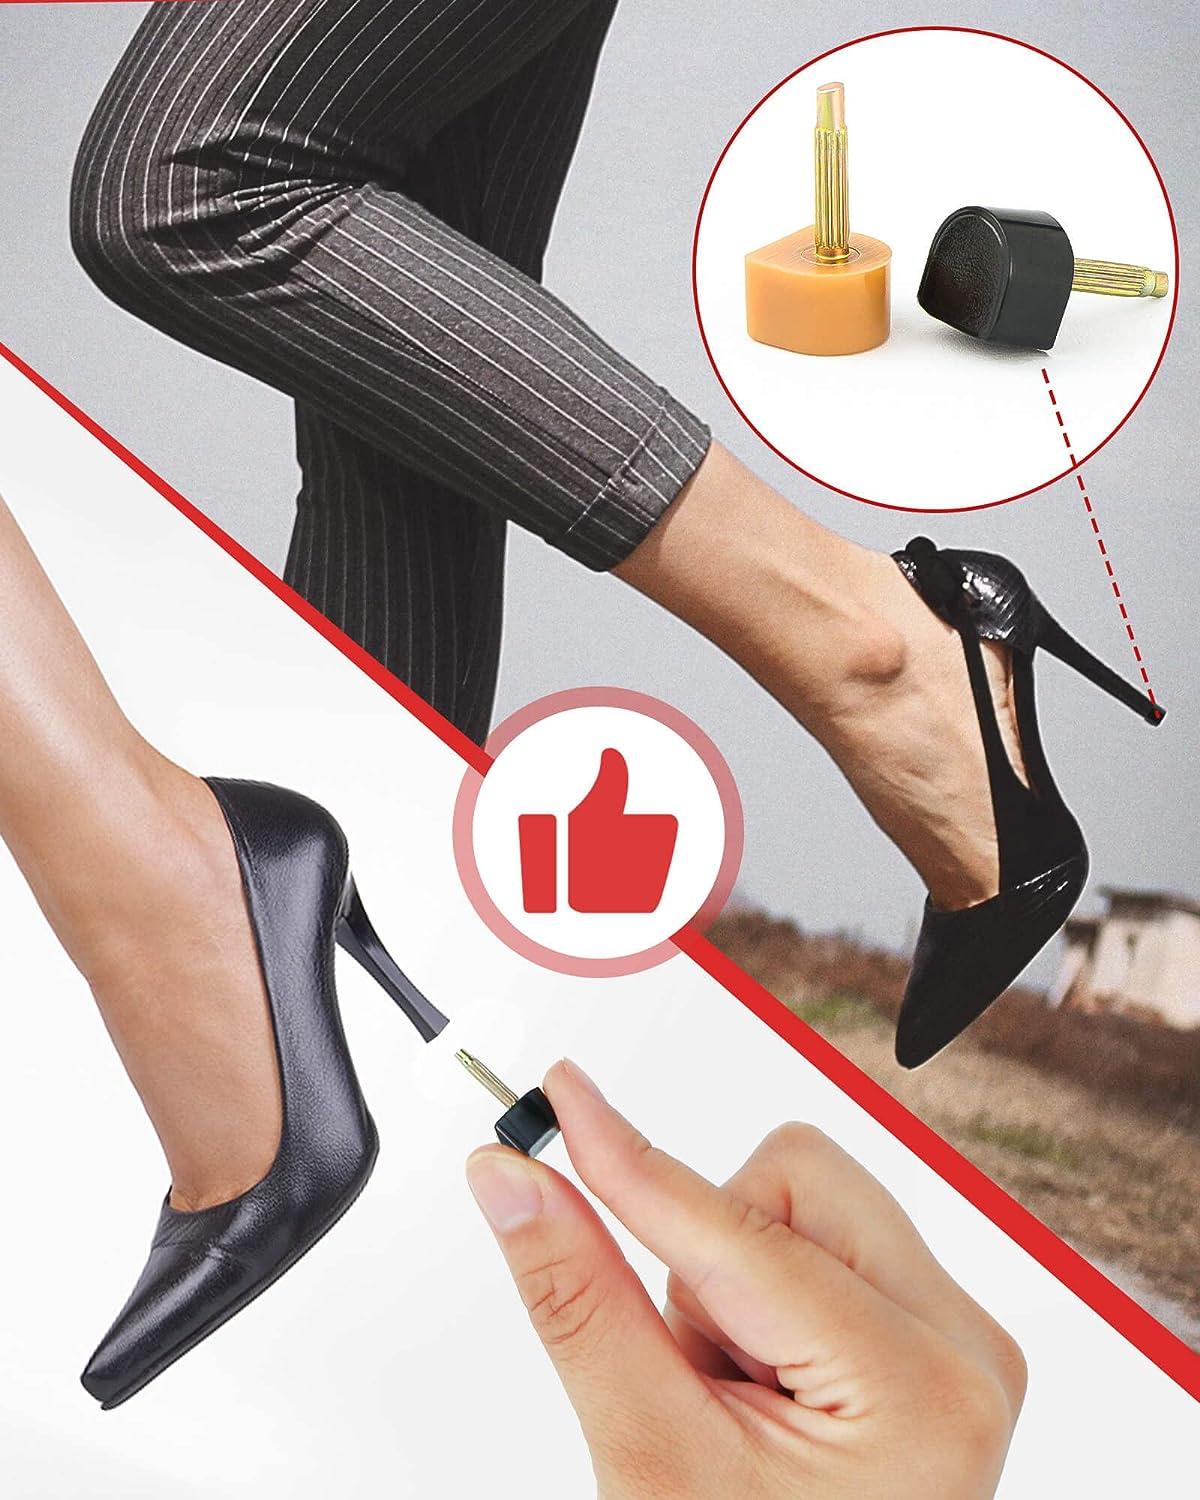 3 Ways to Replace Plastic Tips on High Heels with Rubber - wikiHow